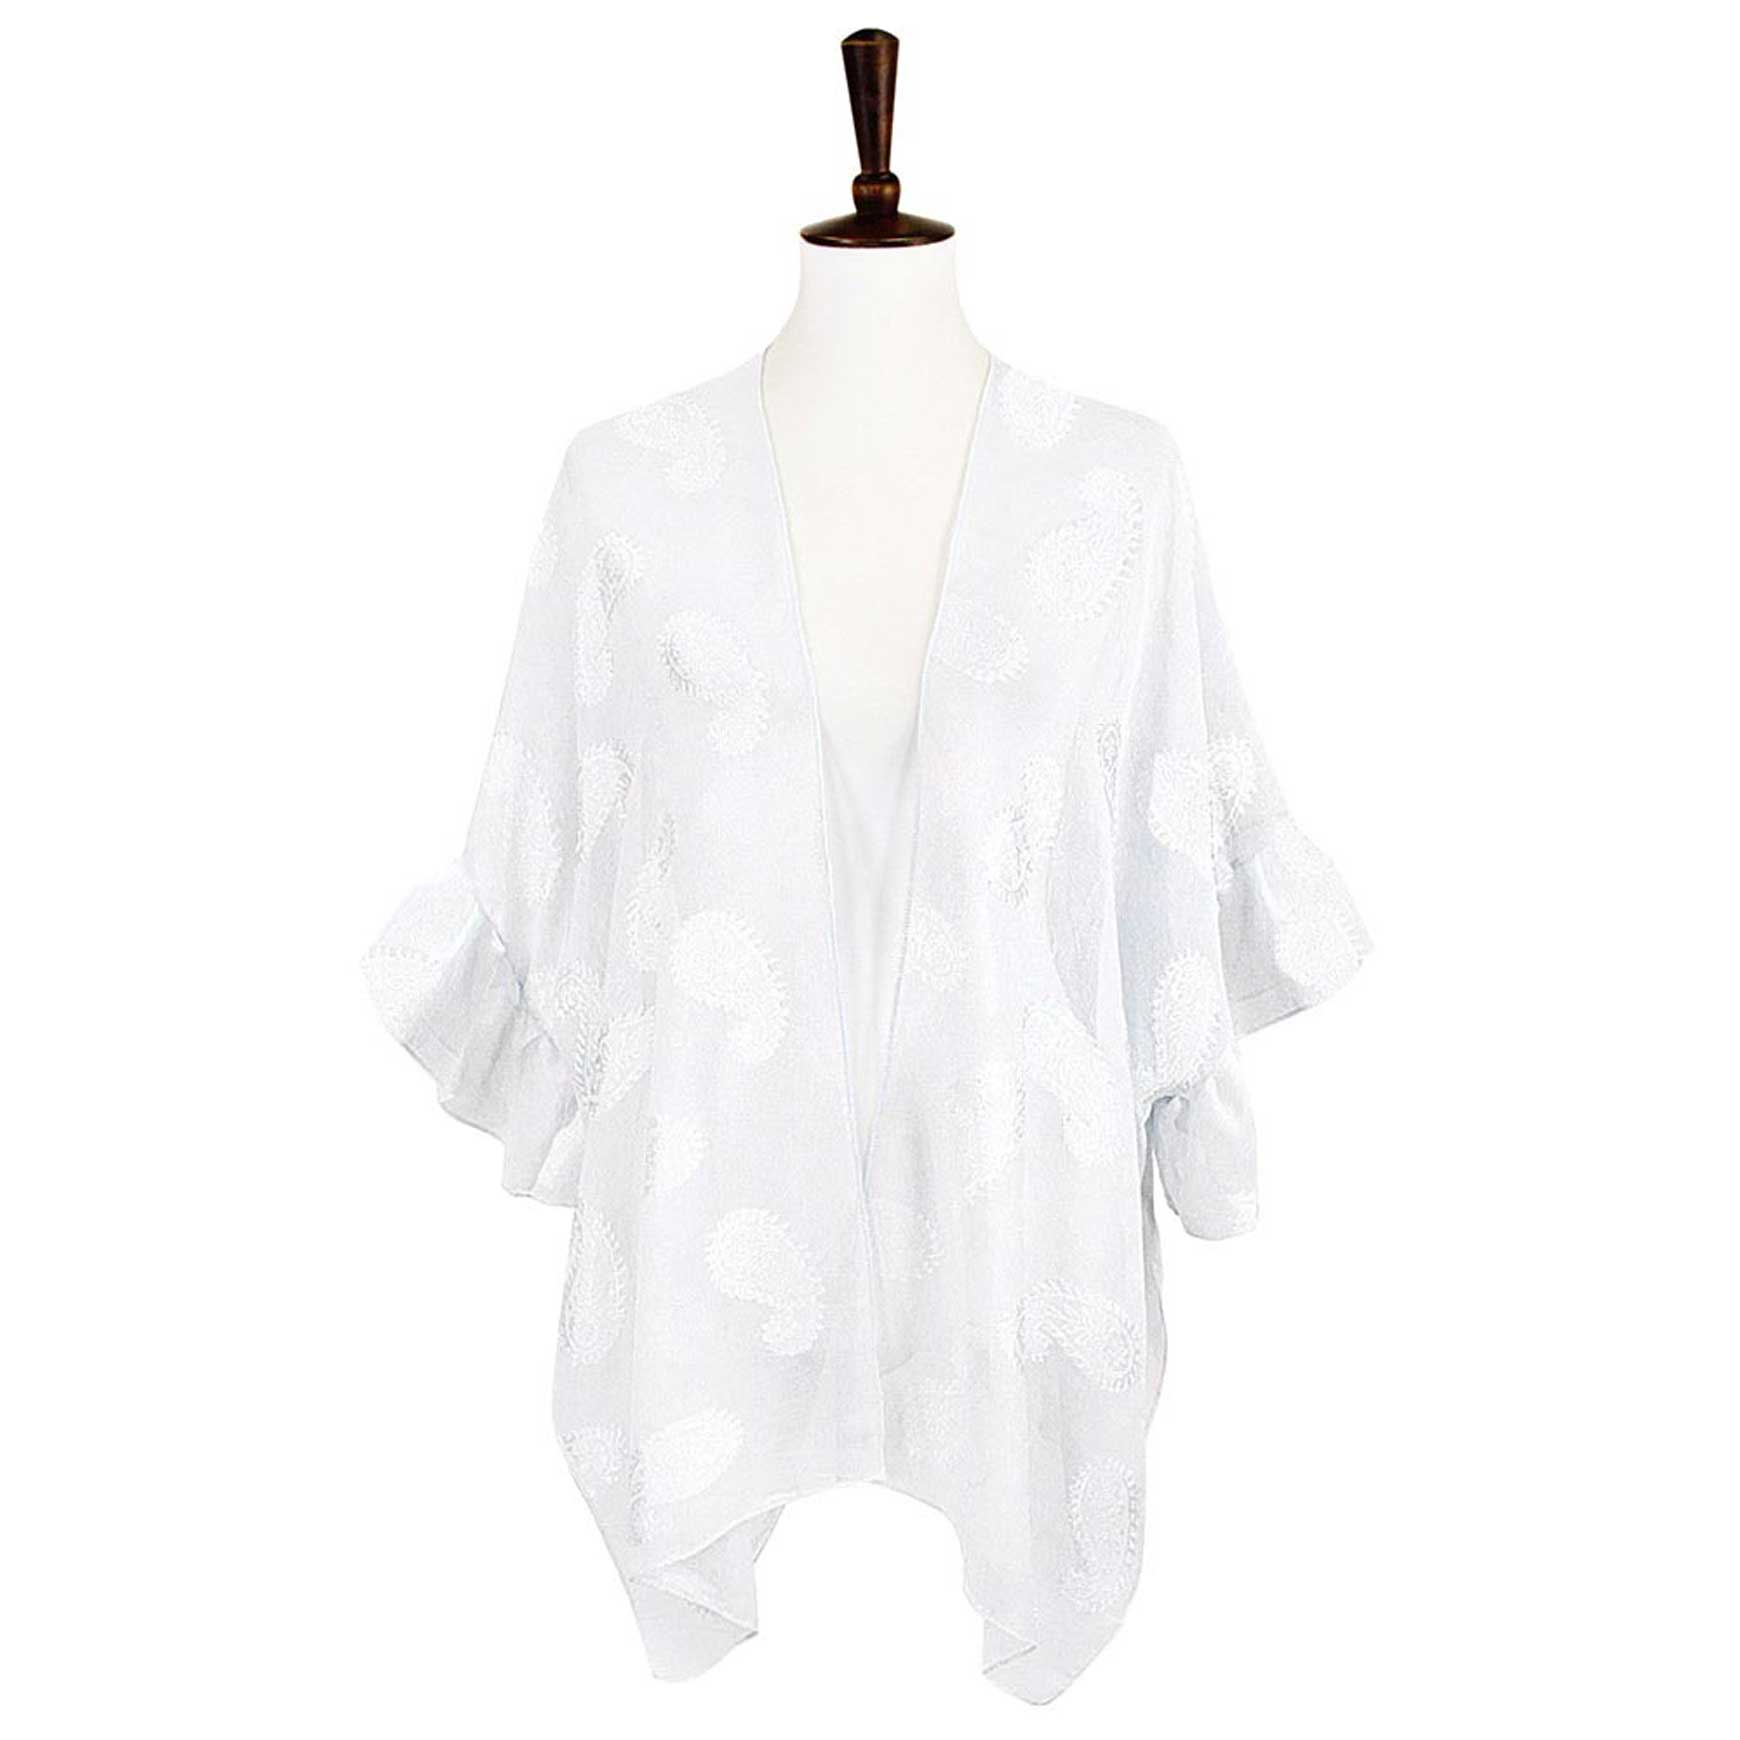 White  Paisley Patterned Sheer Ruffle Sleeves Cover Up Kimono Poncho, The lightweight Kimono poncho top is made of soft and breathable Polyester material. short sleeve swimsuit cover up with open front design, simple basic style, easy to put on and down. Perfect Gift for Wife, Mom, Birthday, Holiday, Anniversary, Fun Night O